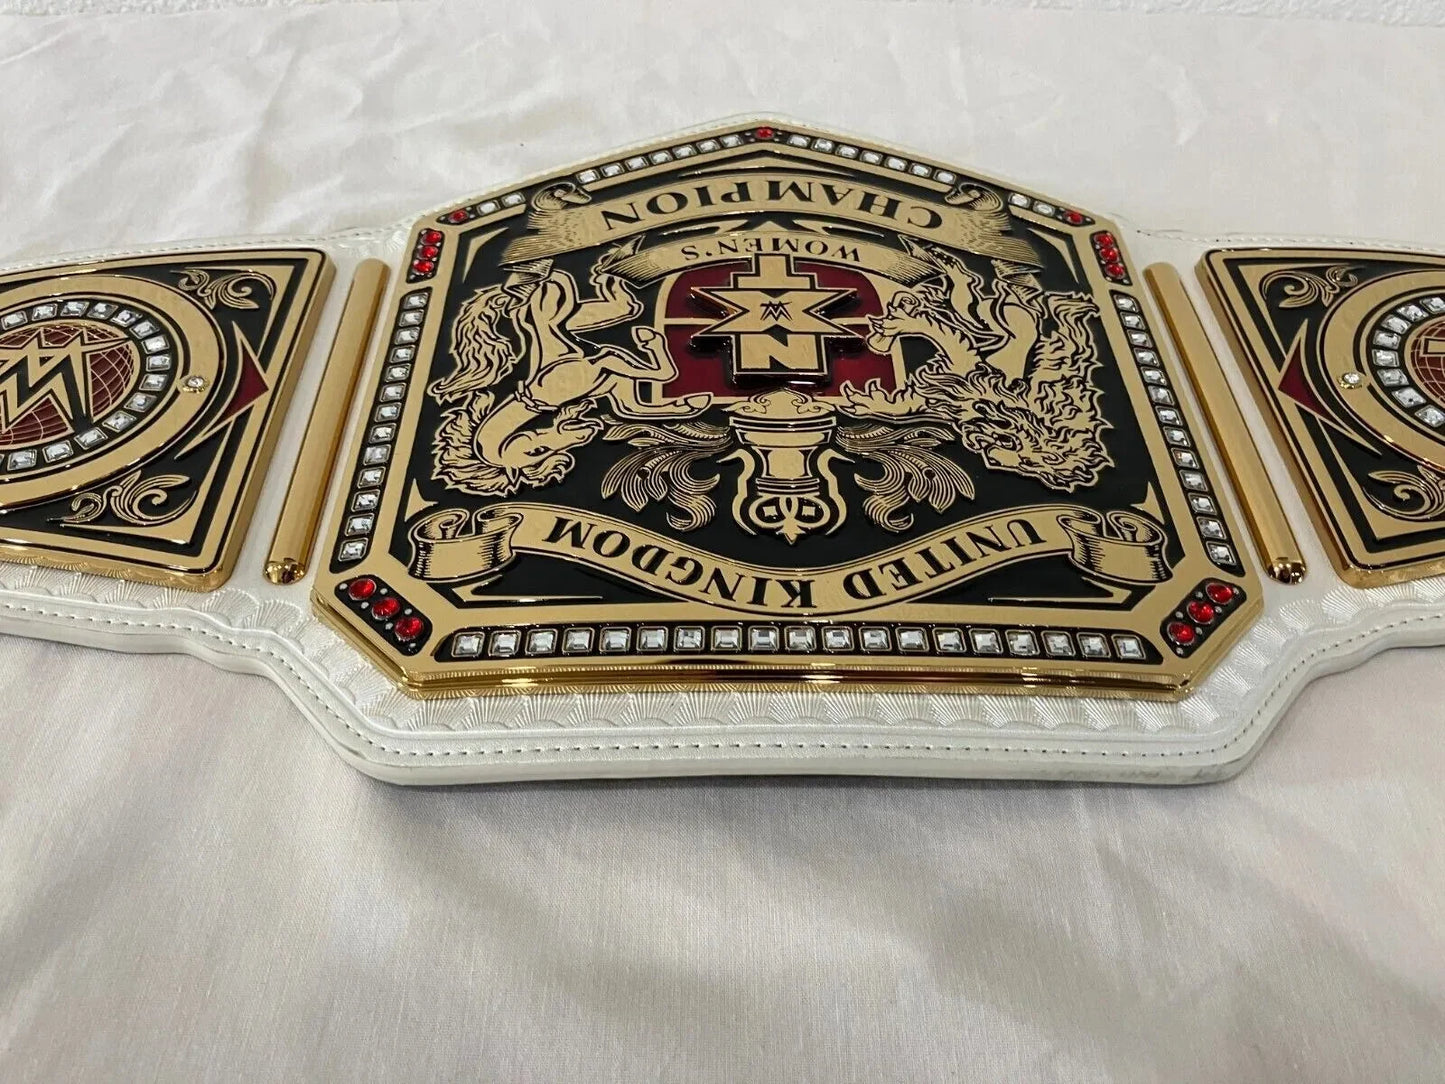 New NXT Women’s United Kingdom Championship Belt White Leather Replica Adult Size